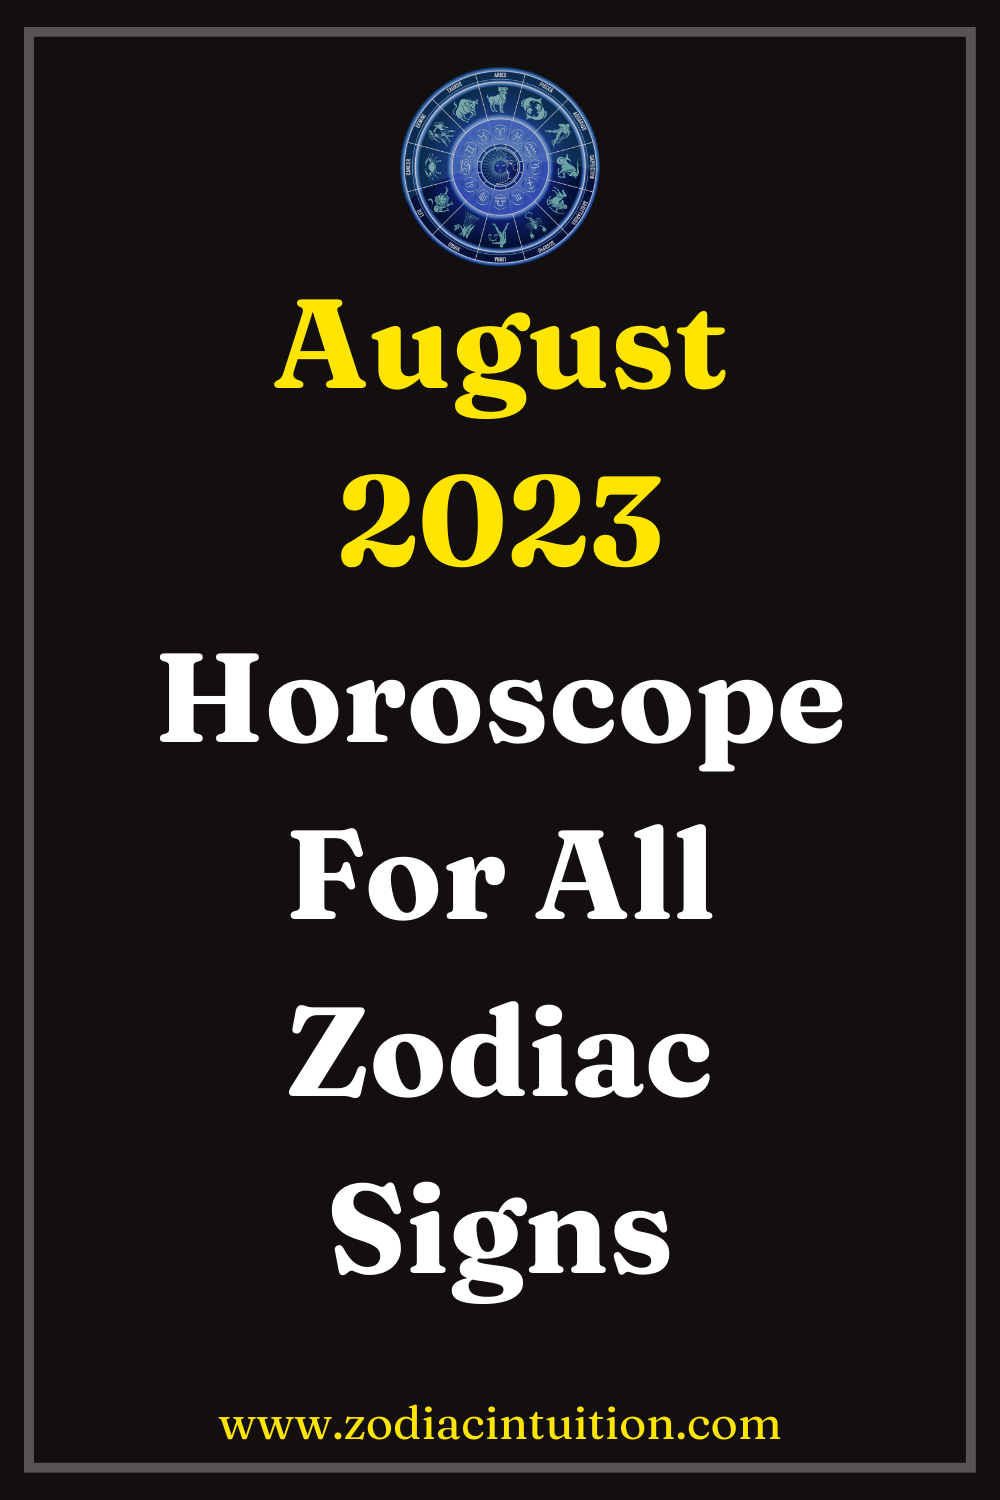 August 2023 Horoscope For All Zodiac Signs